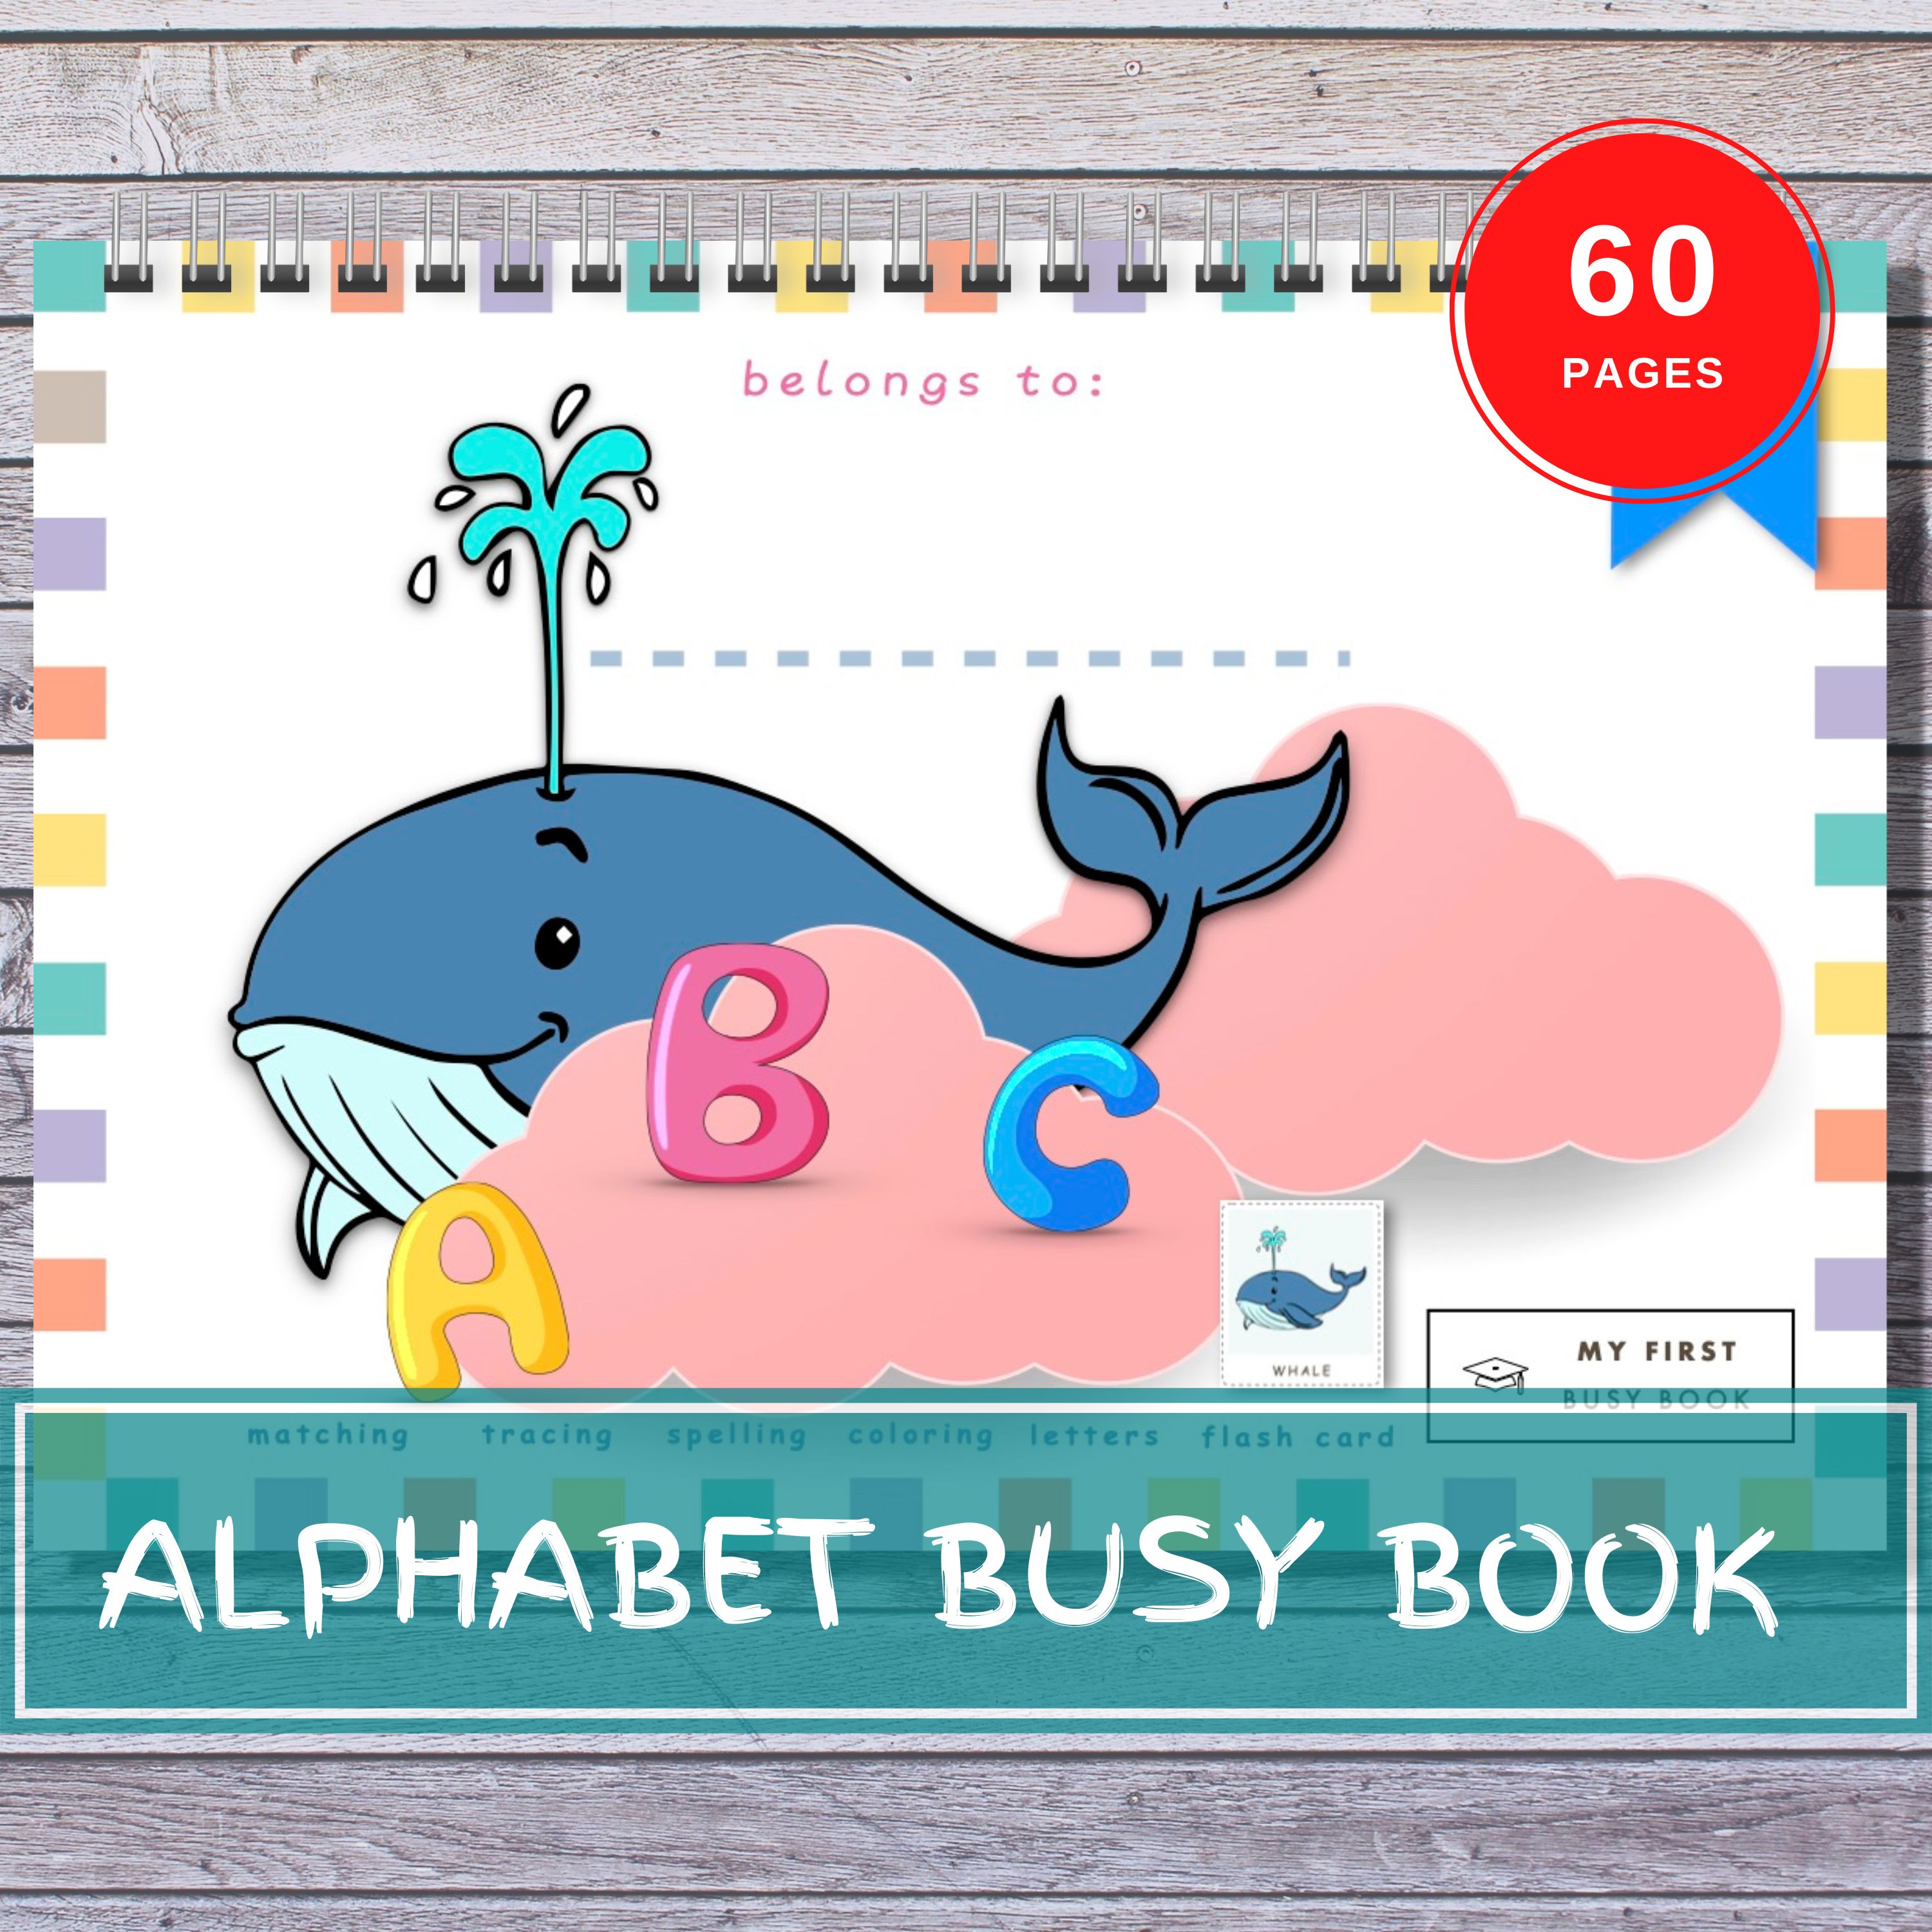 My First Alphabet Children Busy Book Activity Early Learning 3 years old page 1